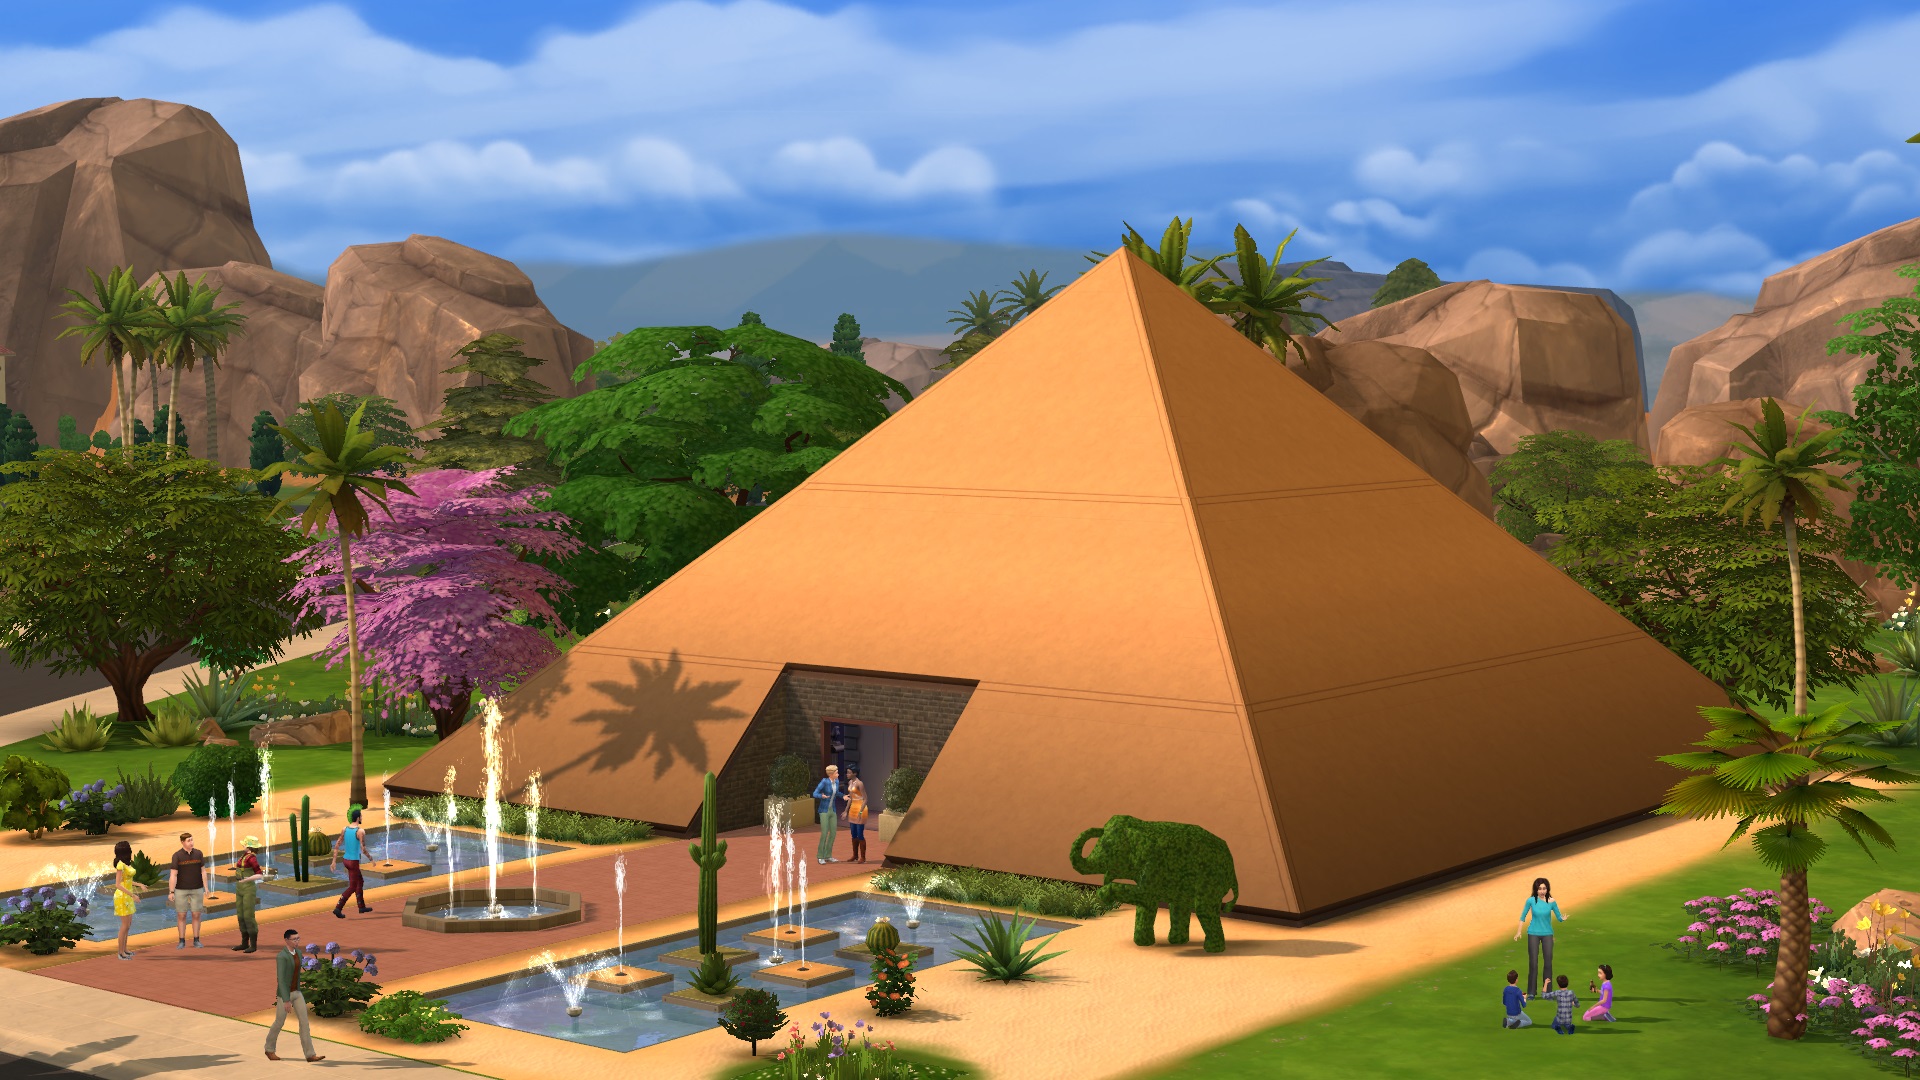 The Sims 4 #6